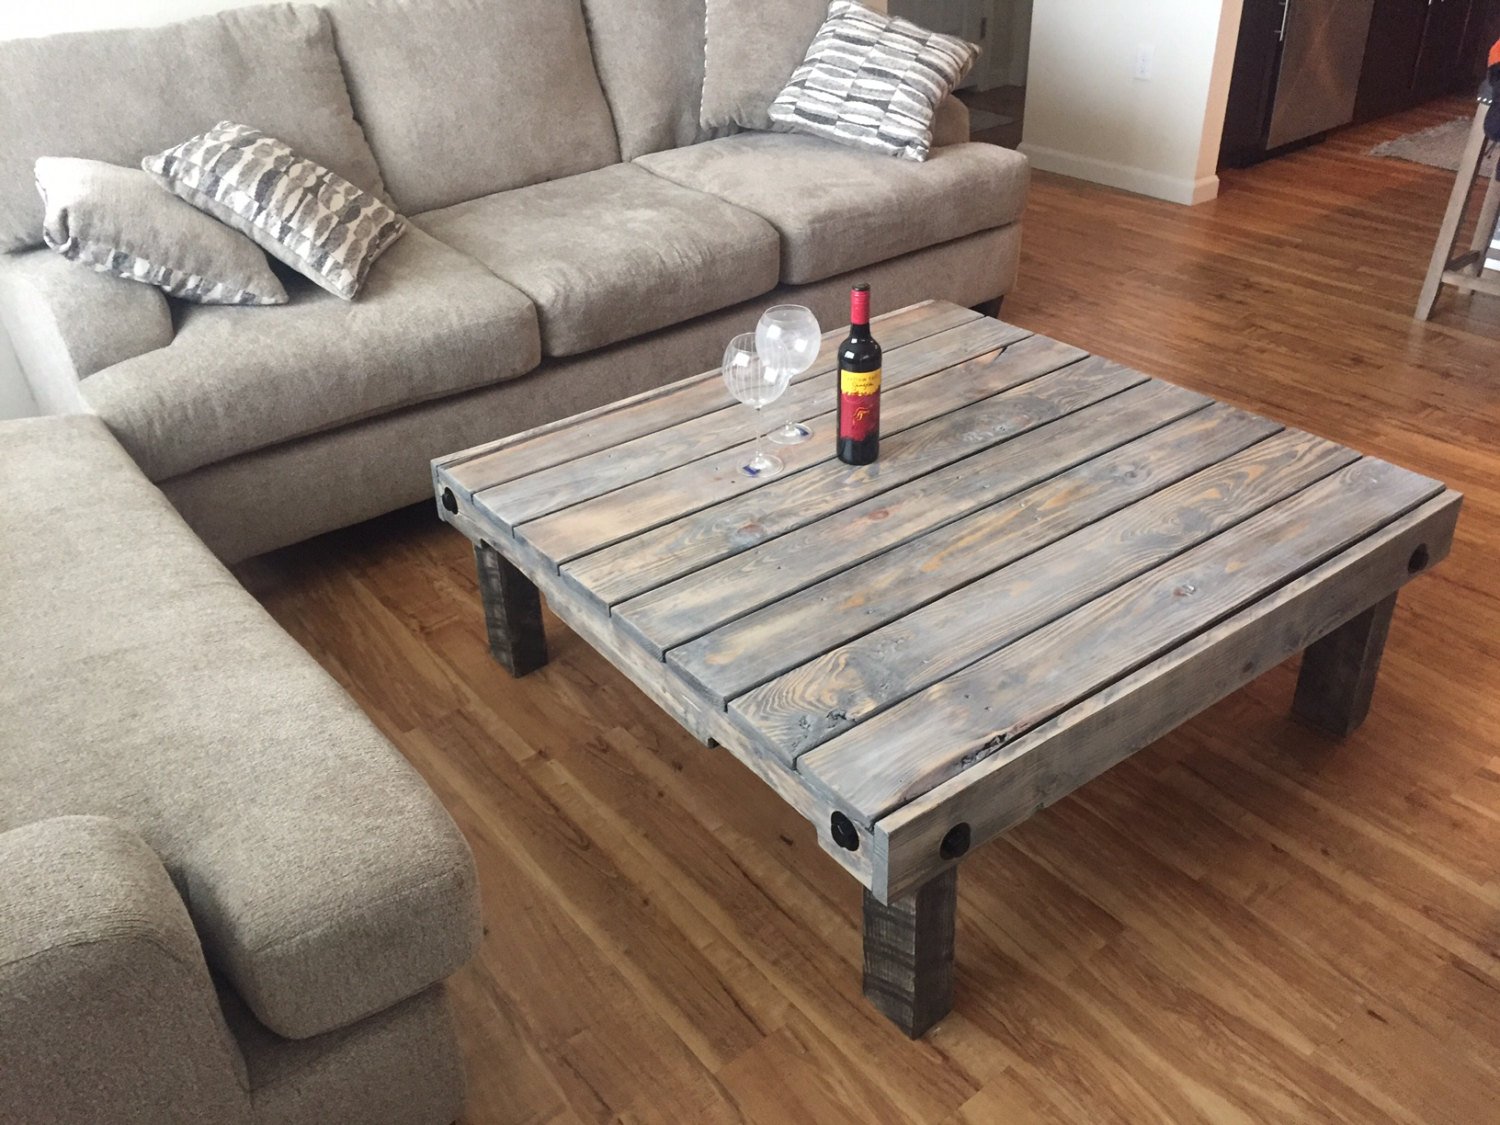 10 creative Ideas for Wood Pallets